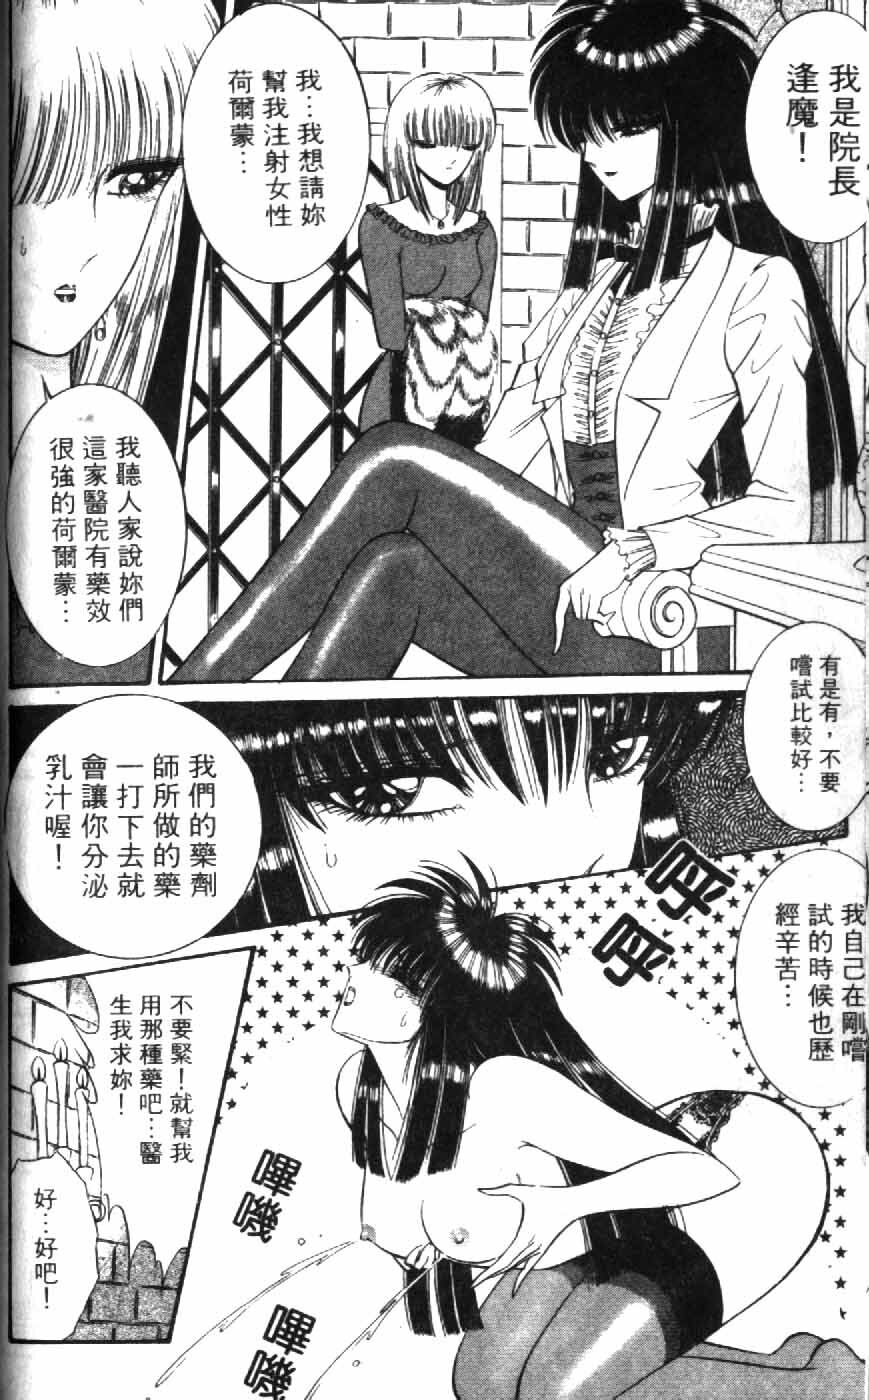 [Senno Knife] Ouma ga Horror Show 1 - Trans Sexual Special Show 1 | 顫慄博覽會 1 [Chinese] page 50 full